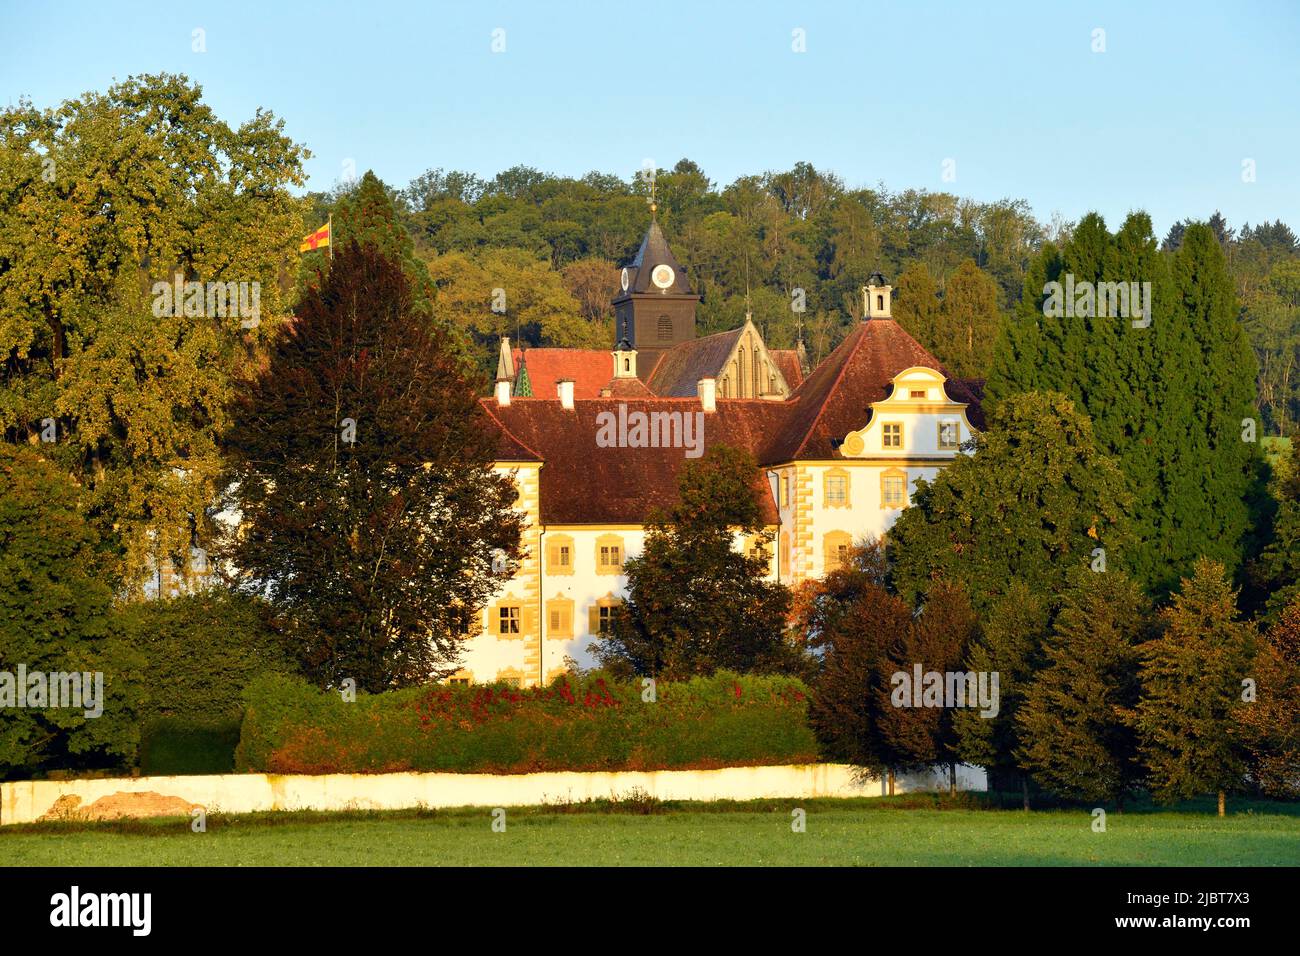 Germany, Bade Wurttemberg, Lake Constance (Bodensee), Salem, Castle and former Cistercian abbey of Salem Stock Photo